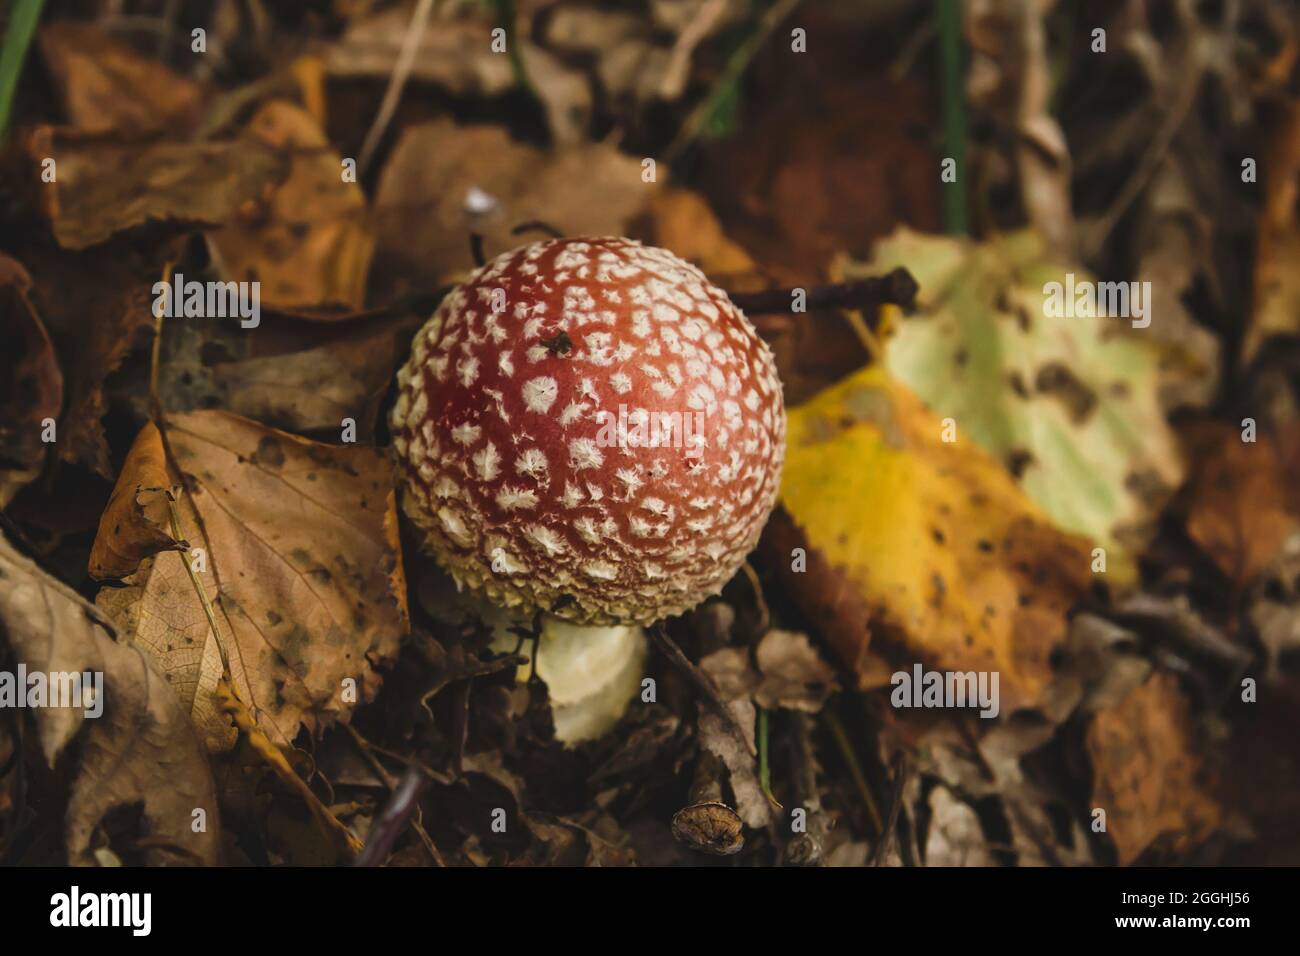 Amanita muscaria, fly agaric psychoactive mushroom growing wild in the autumnal forest, autumn and environmental concept Stock Photo